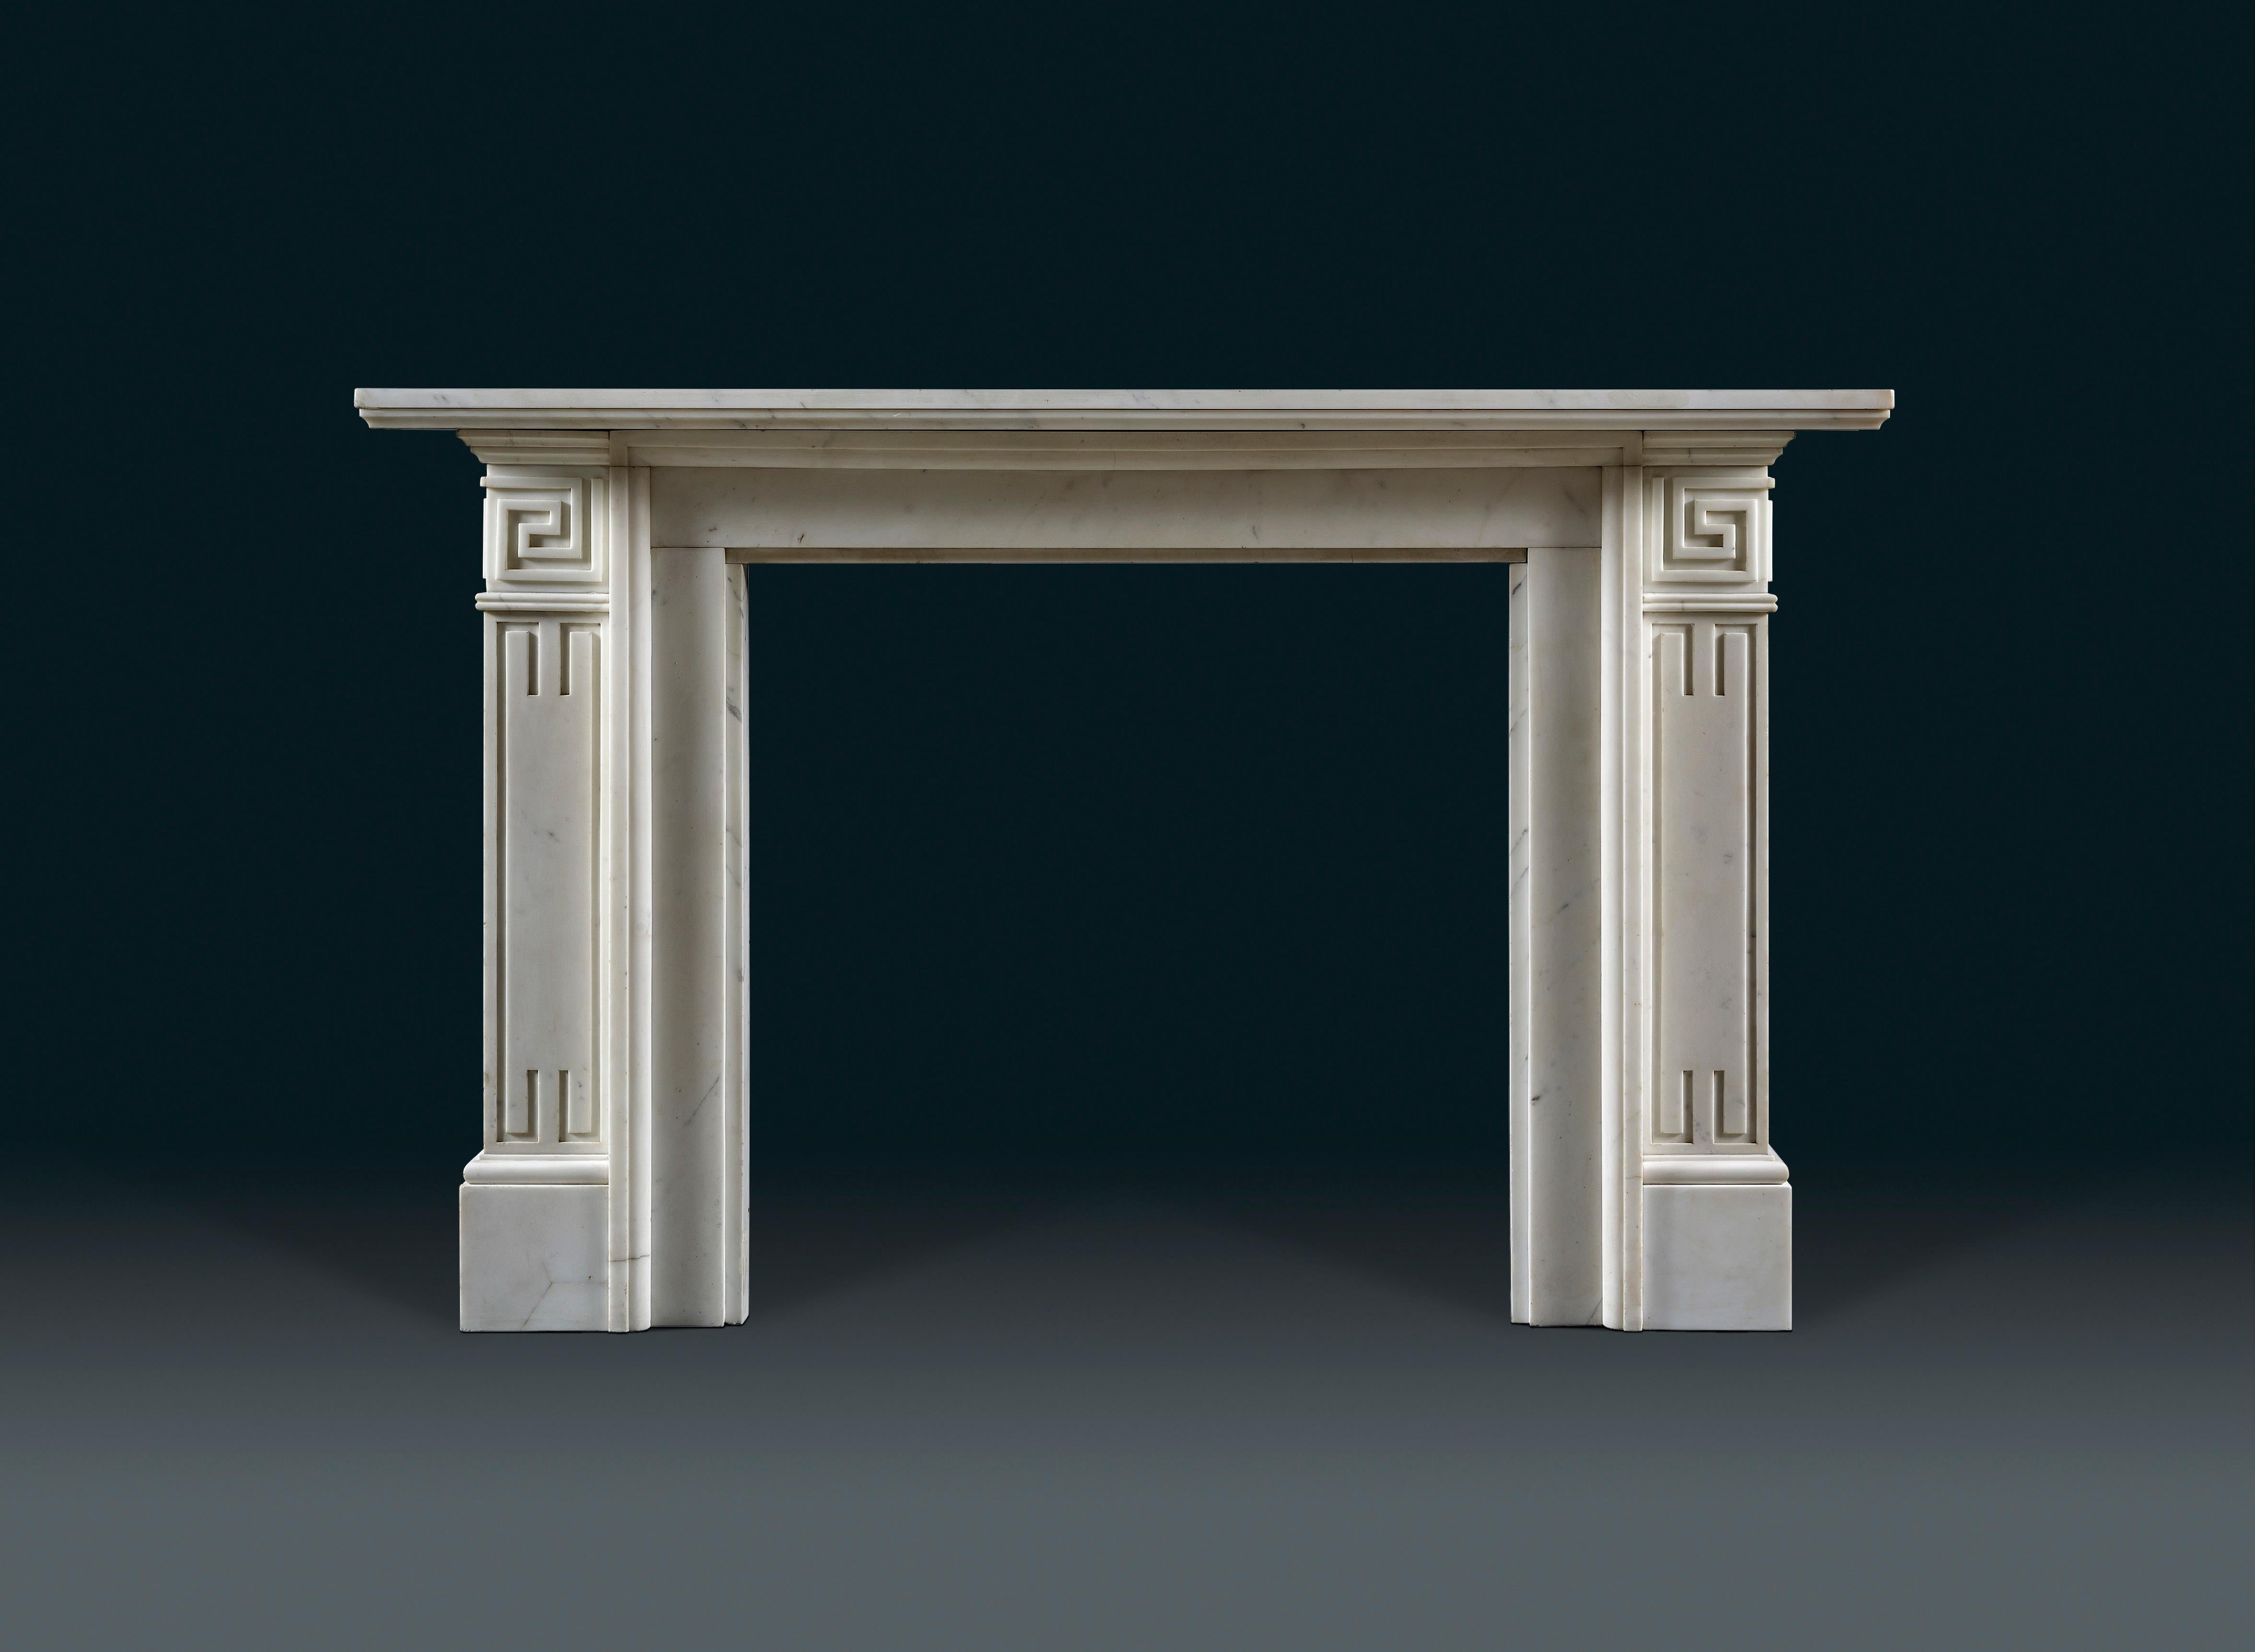 A pair of 19th century Grecian Revival chimneypieces in the manner of Thomas Hope. The end blocks and jambs incised with Greek Key detail, surmounted by a moulded shelf.